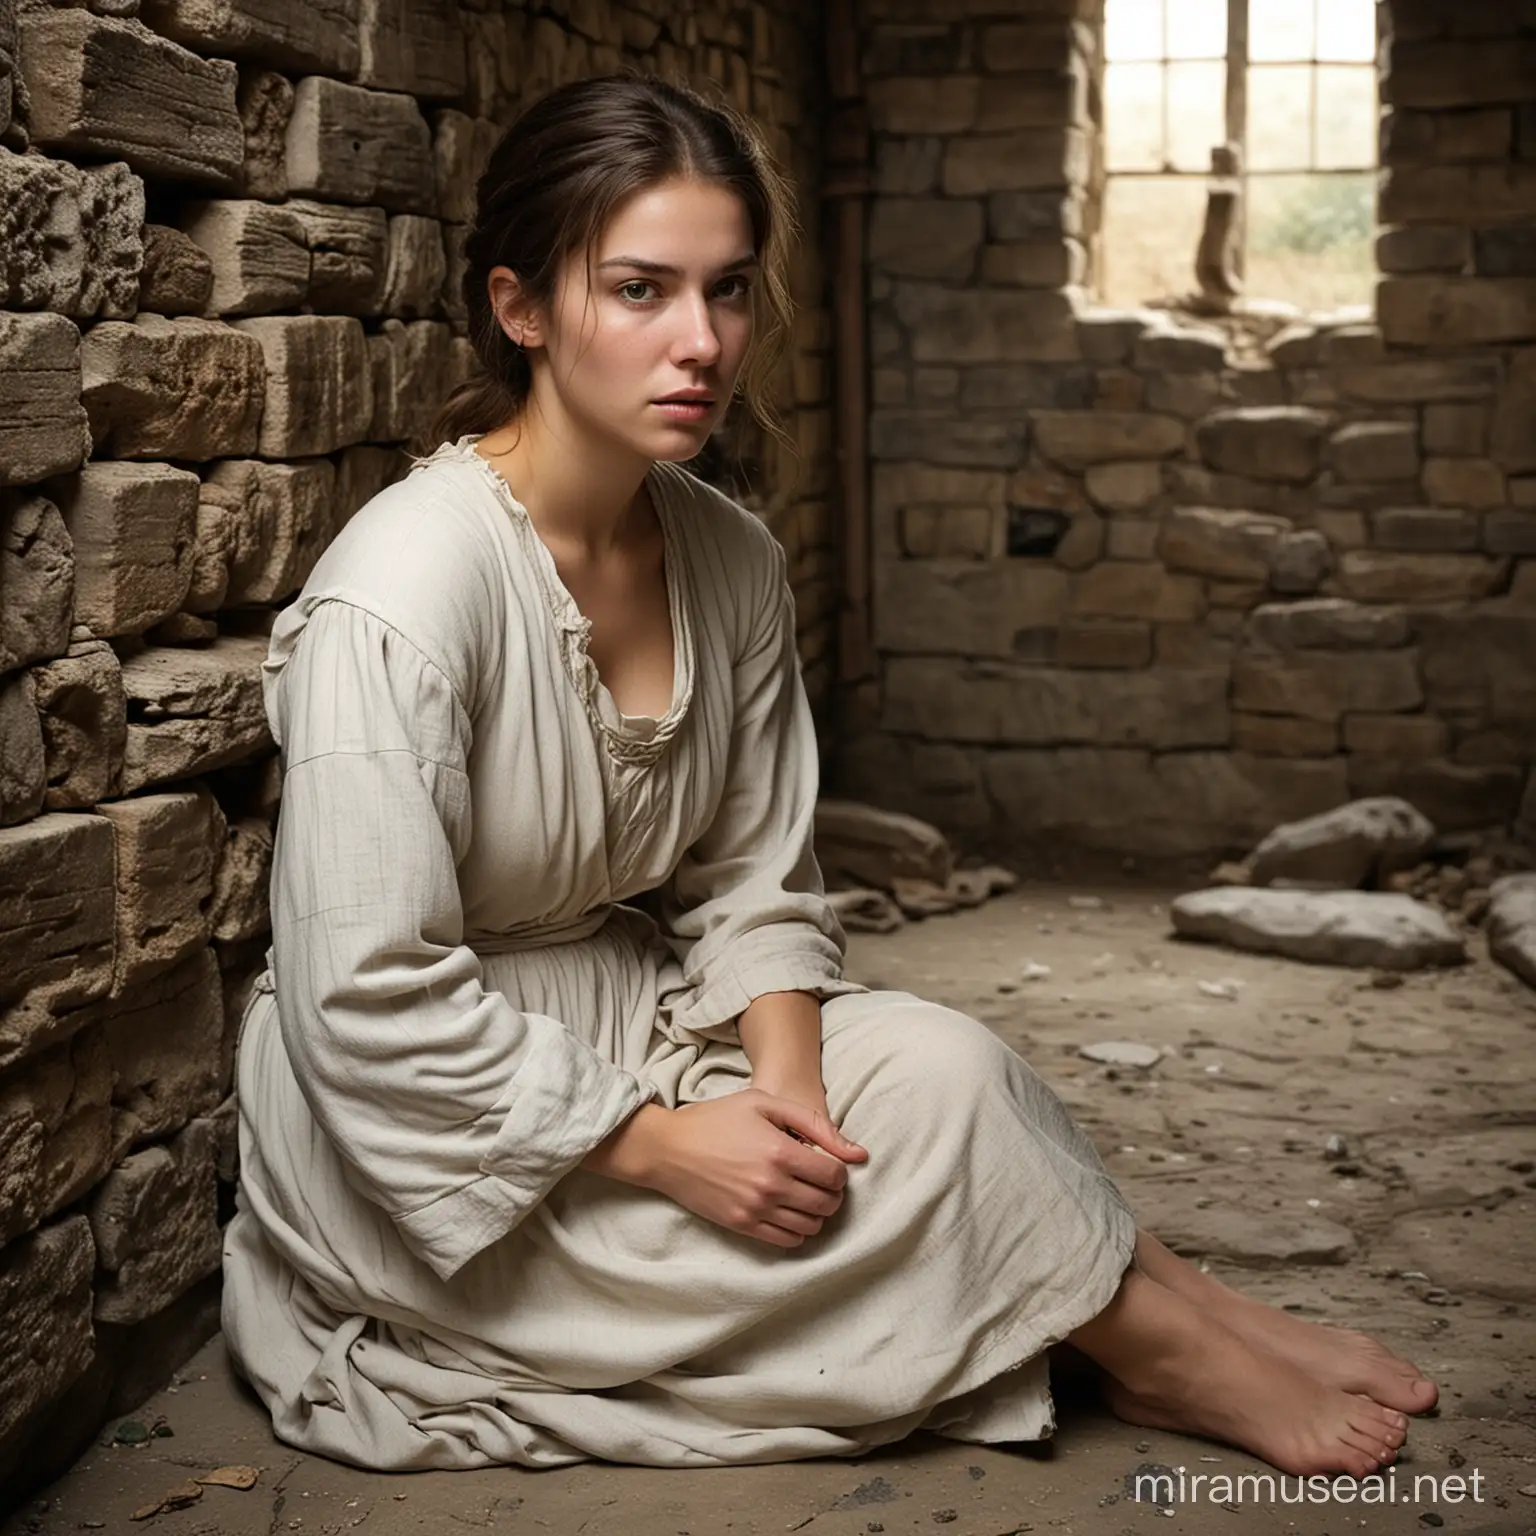  Subject: The main subject of the image is a young peasant woman, described as busty and slim, sitting in a dungeon cell. She is depicted as barefoot, adding to the sense of vulnerability and desperation.
Setting: The setting of the image is a dungeon cell with stone walls, evoking a sense of confinement and bleakness. The time period is specified as the 1600s, suggesting a historical context.
Background: The background consists of stone walls, emphasizing the harsh and oppressive environment of the dungeon. The lighting is likely dim, contributing to the overall atmosphere of gloominess.
Style/Coloring: The style of the image is realistic, capturing the details of the woman's appearance and the dungeon environment. The coloring is likely muted, with earthy tones to convey the gritty nature of the setting.
Action: The woman is depicted in a head-to-knee view, indicating her posture of sadness and desperation. Her body language suggests a sense of resignation and hopelessness.
Items/Costume: The woman is wearing a dirty white long-sleeve sack dress, typical of peasant attire during the specified time period. The dress appears worn and tattered, reflecting the woman's impoverished circumstances.
Appearance: The woman is described as young, with a specific age of 25 years old. Her physique is characterized as busty and slim, adding to the realism of her portrayal.
Accessories: The woman is not described as wearing any accessories, further emphasizing her destitute state.